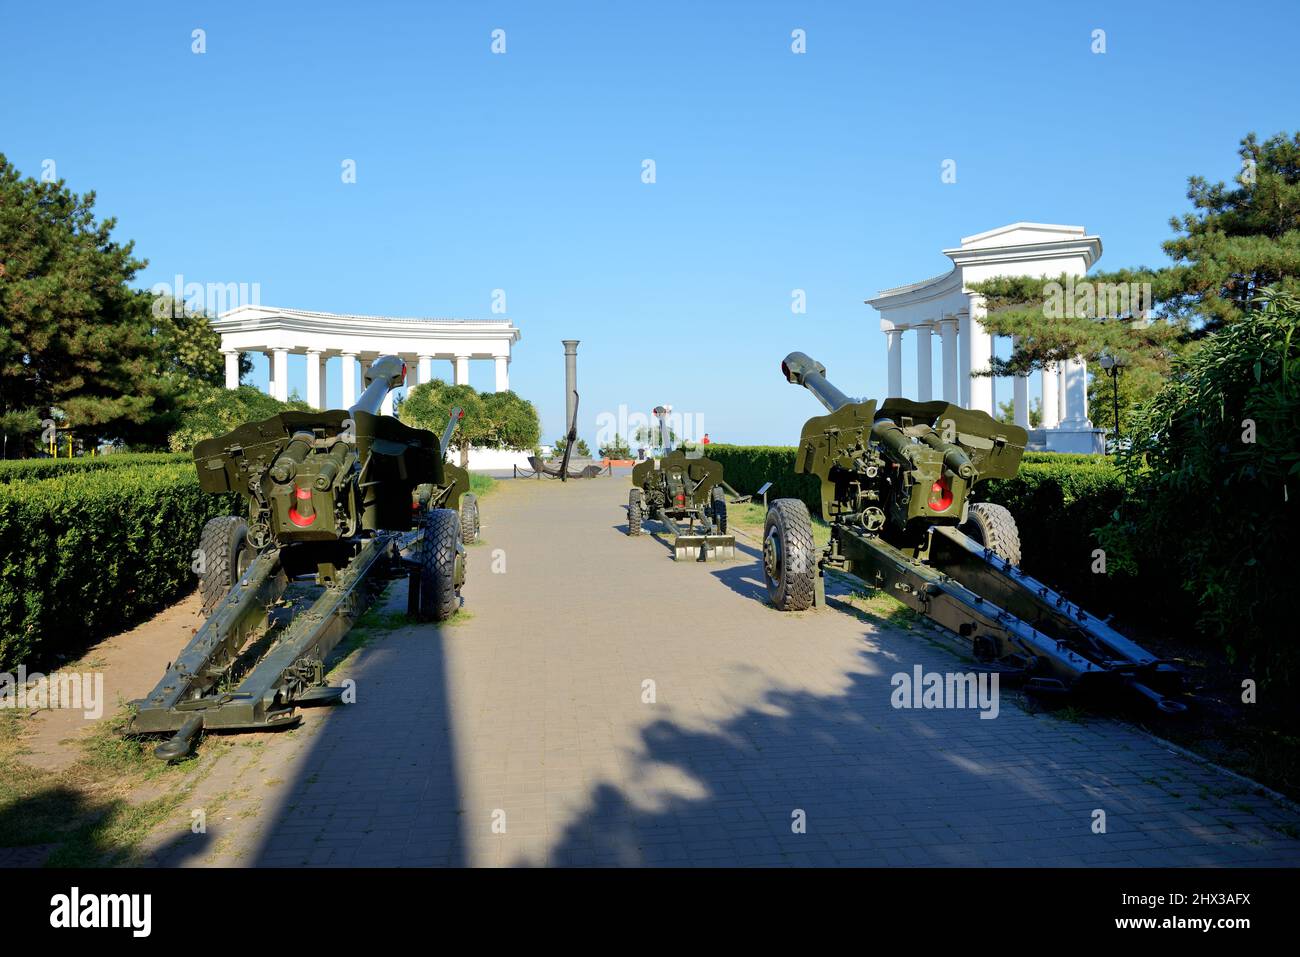 CHORNOMORSK, UKRAINE - AUGUST 9: The memorial to heroic defence of Chornomorsk, in second World War on August 9, 2021 in Chornomorsk, Ukraine. Stock Photo